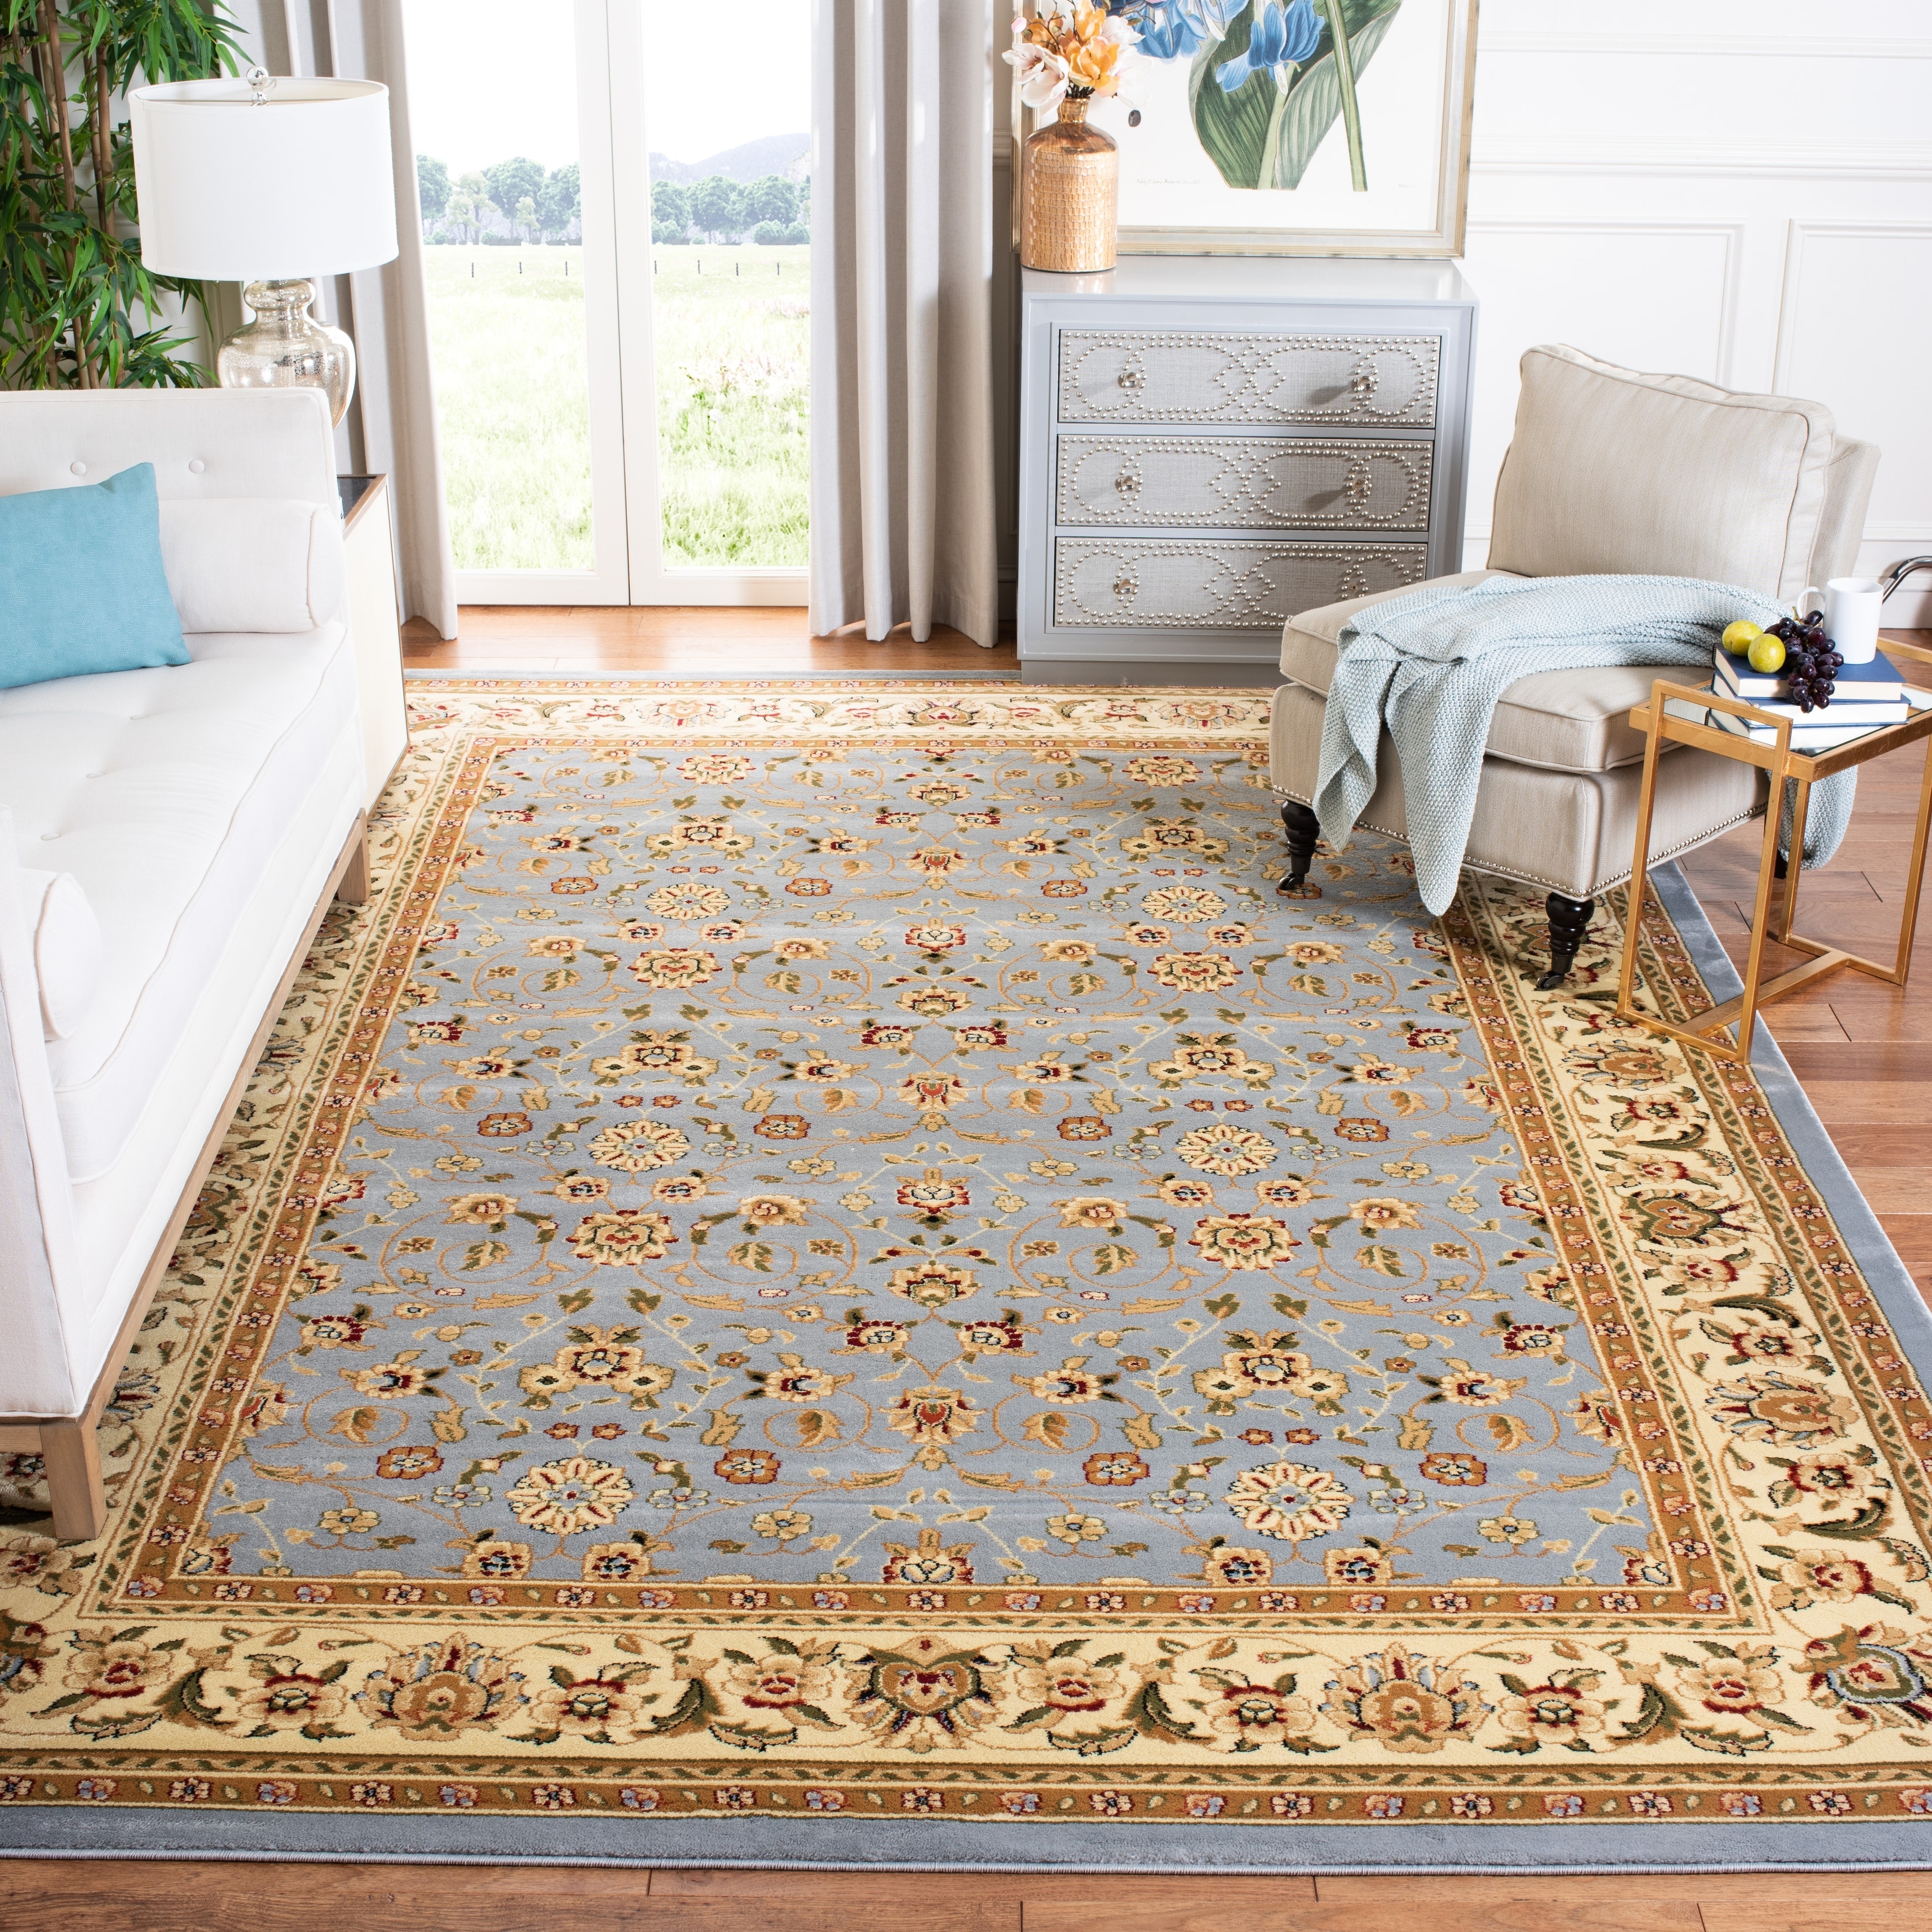 https://ak1.ostkcdn.com/images/products/is/images/direct/66a69bbe3d62843b892432e92c1ae8e217c3fae4/SAFAVIEH-Lyndhurst-Adelyne-Traditional-Oriental-Rug.jpg